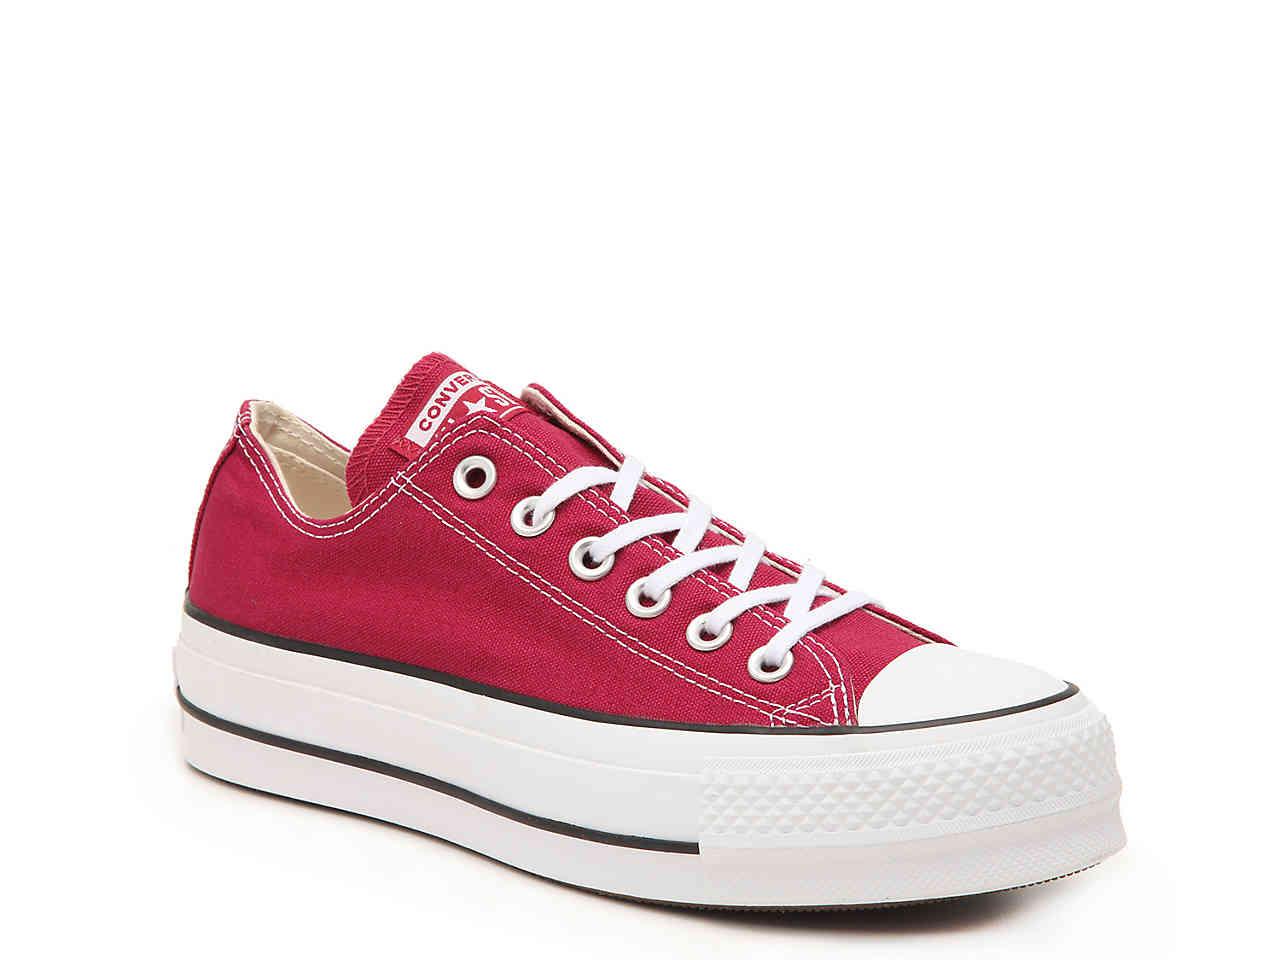 Converse Chuck Taylor All Star Lift Platform Sneaker in Red | Lyst